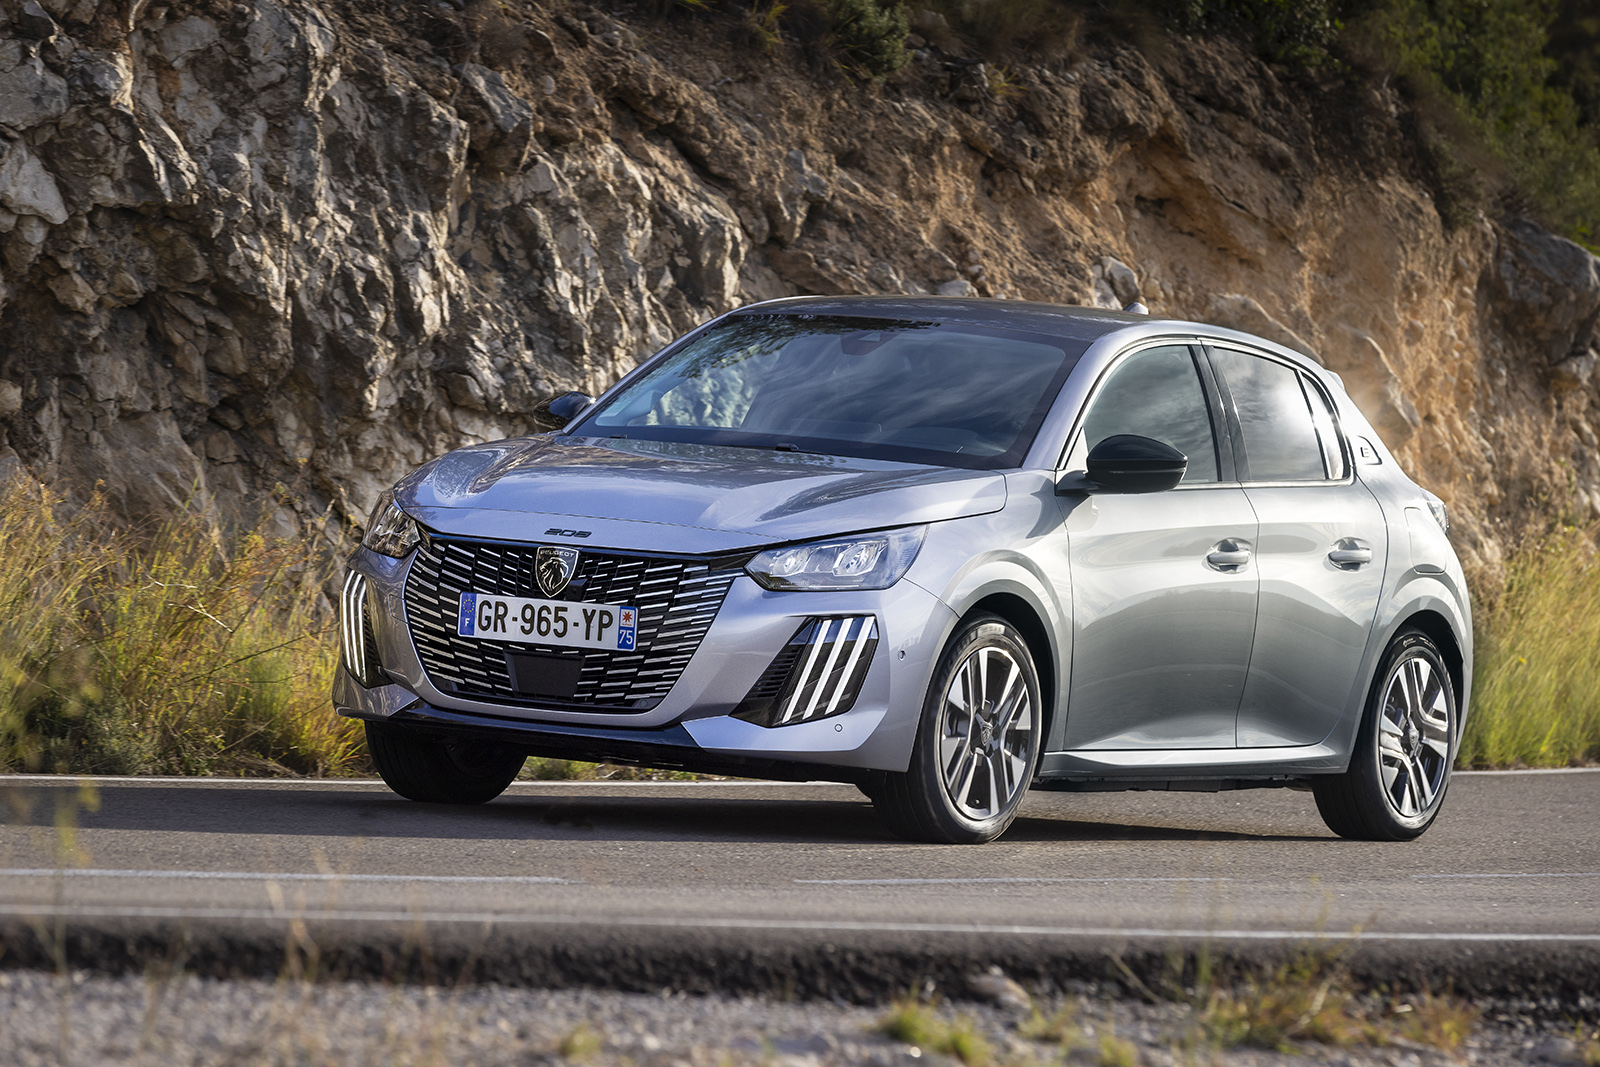 Peugeot 208 and e-208 review 2023: Bright future for updated supermini?